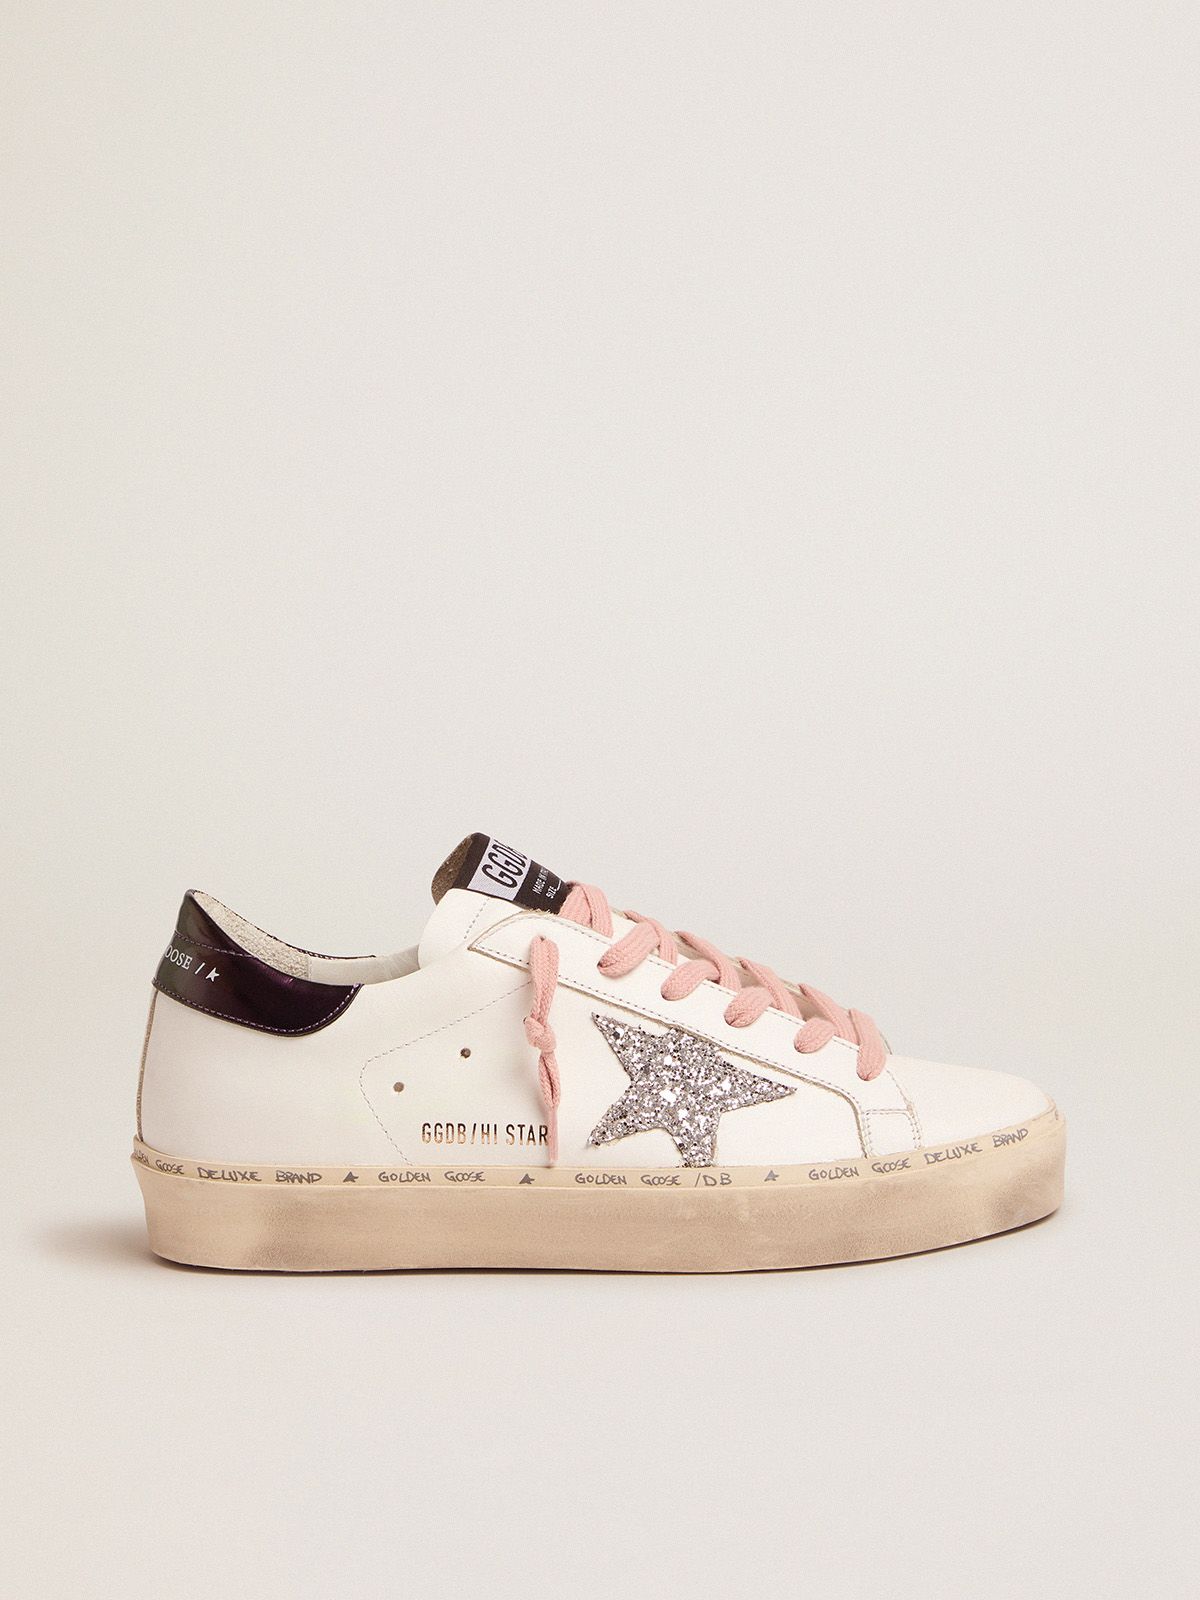 White Hi-Star sneakers glittery star and laces | Golden